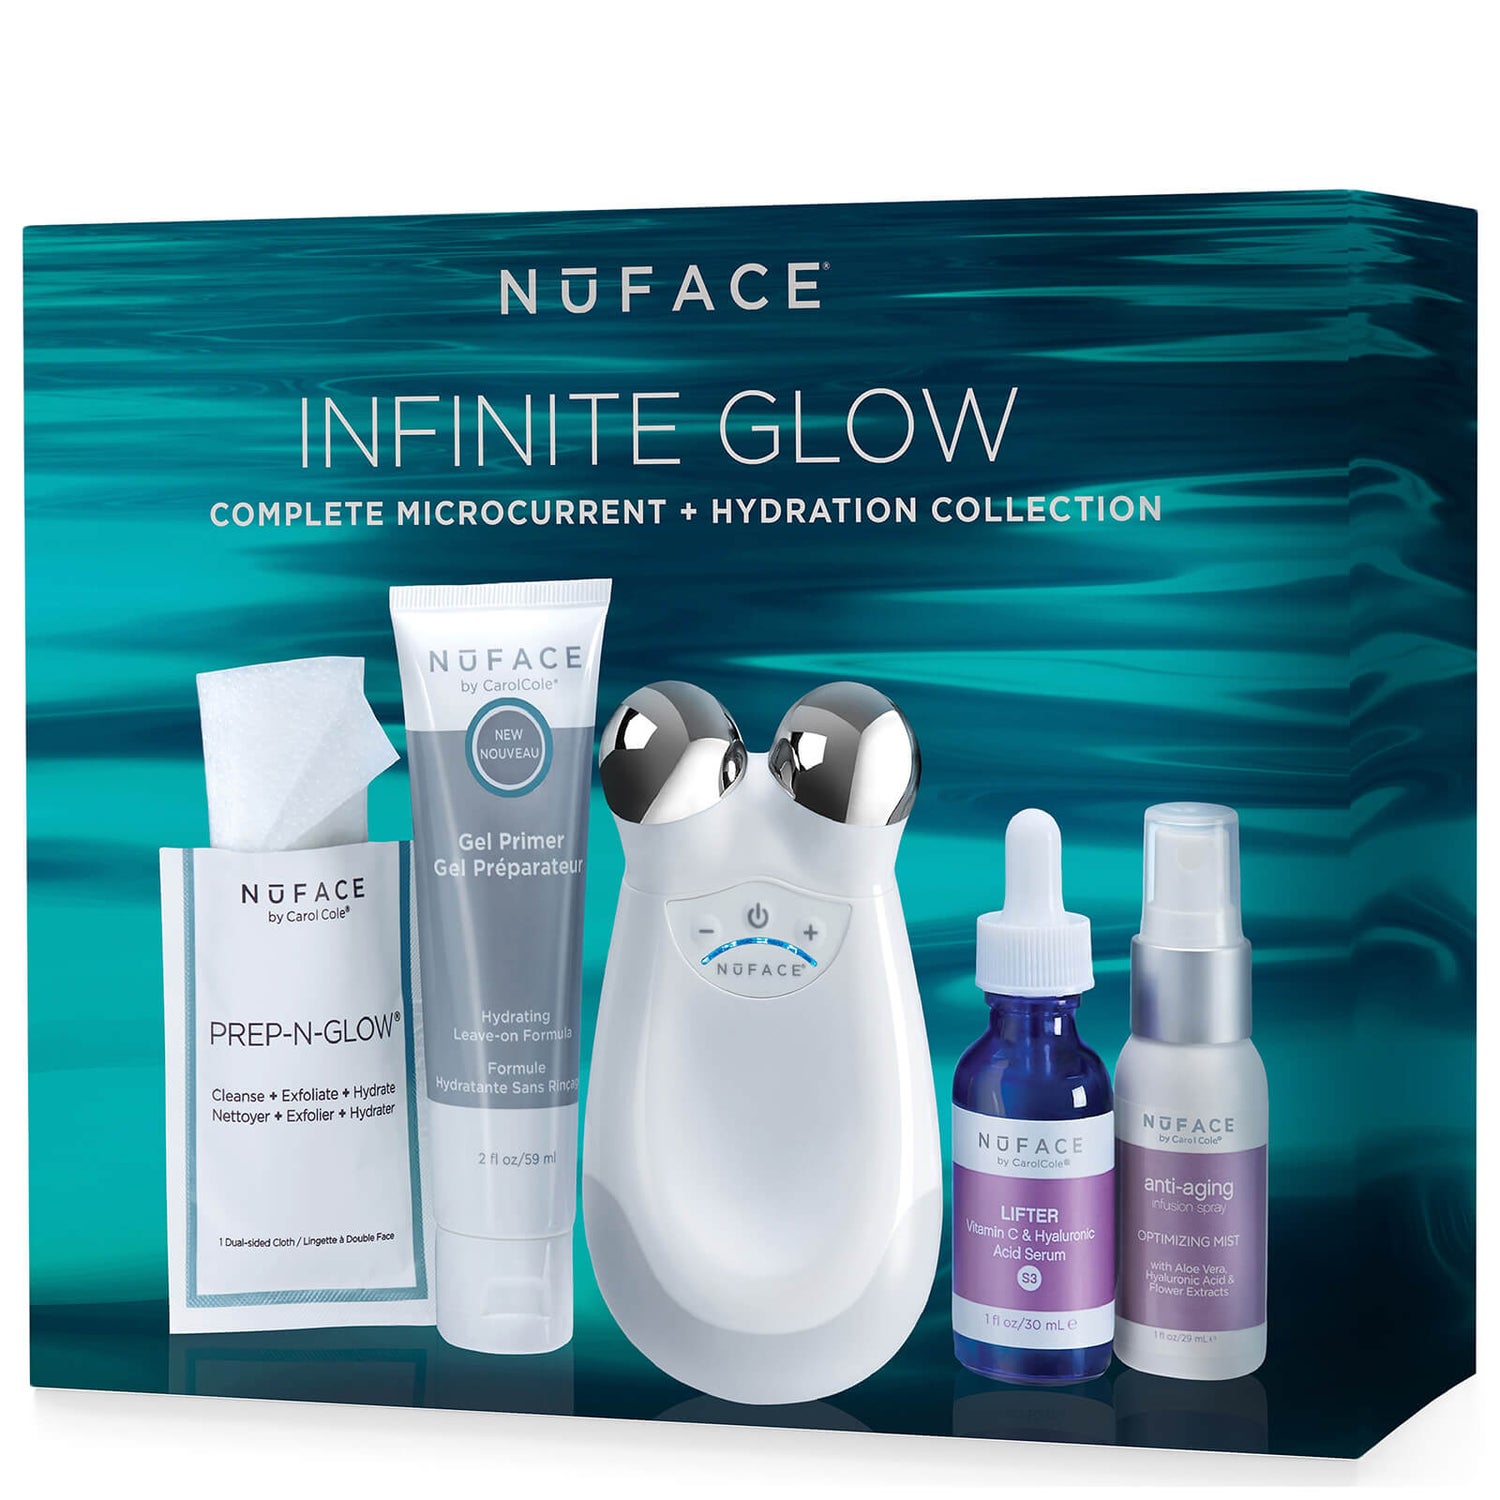 NuFACE Trinity Infinite Glow Complete Microcurrent and Hydration Collection (Worth £397.00)